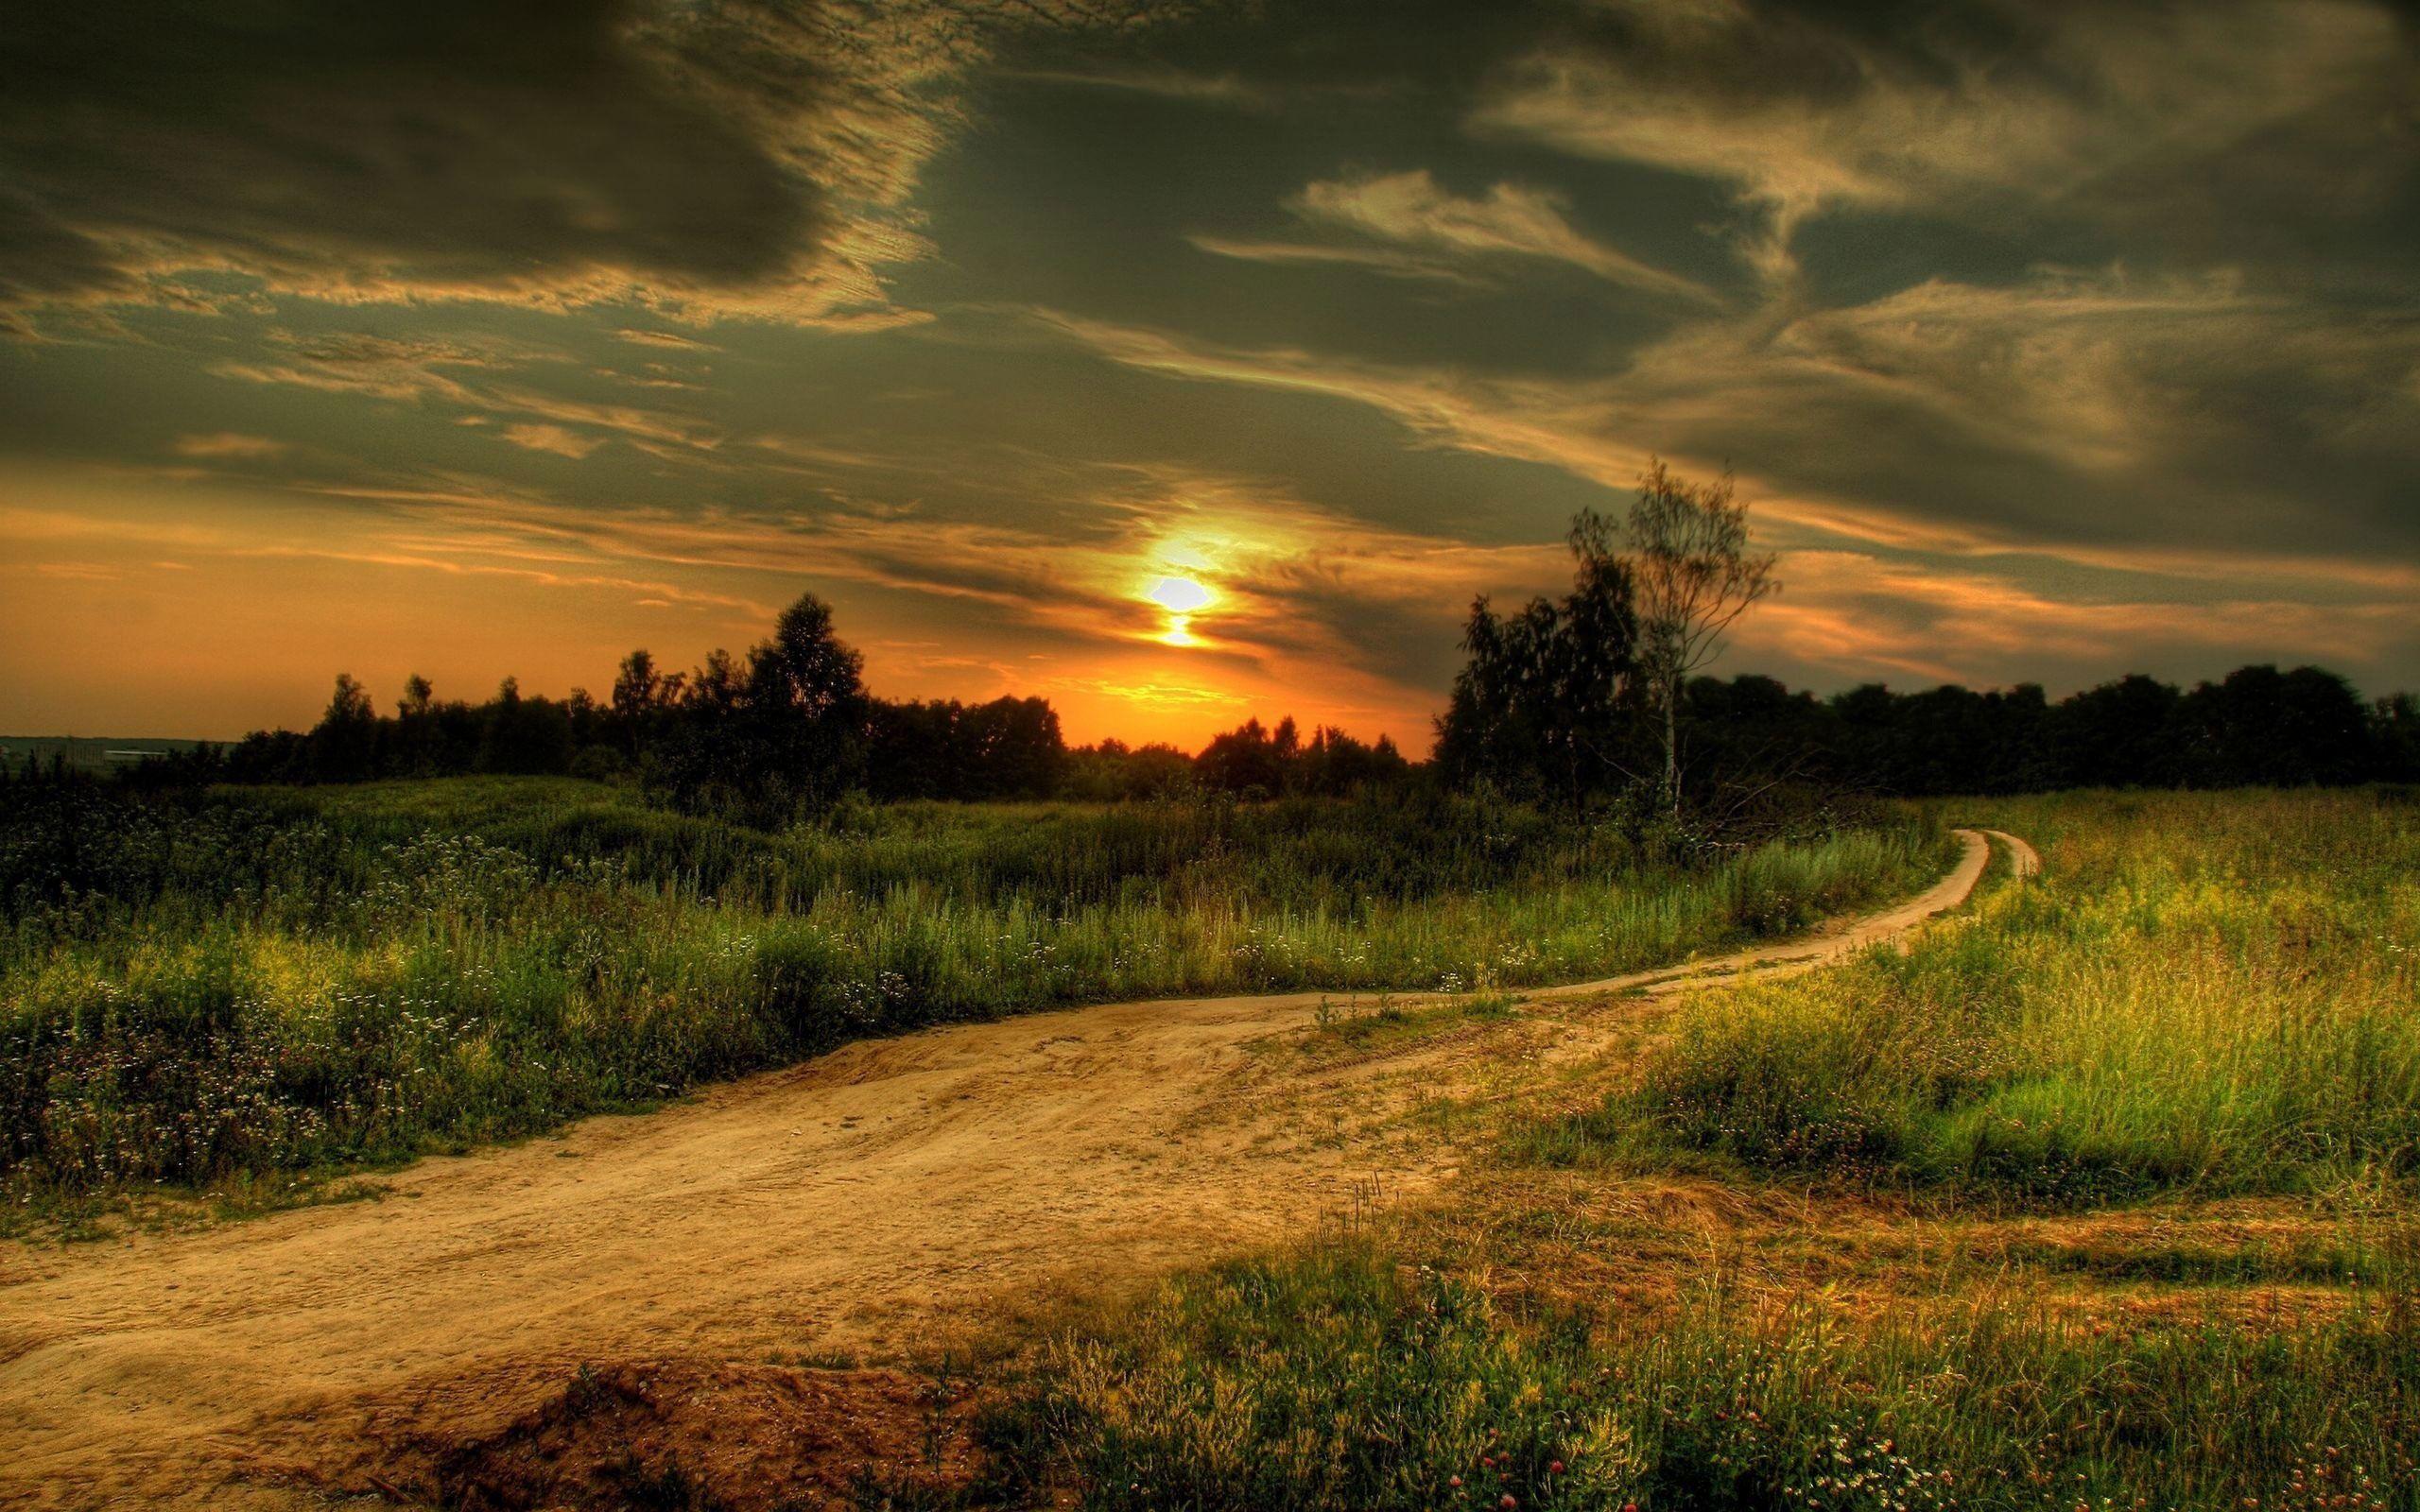 Country Road wallpaper